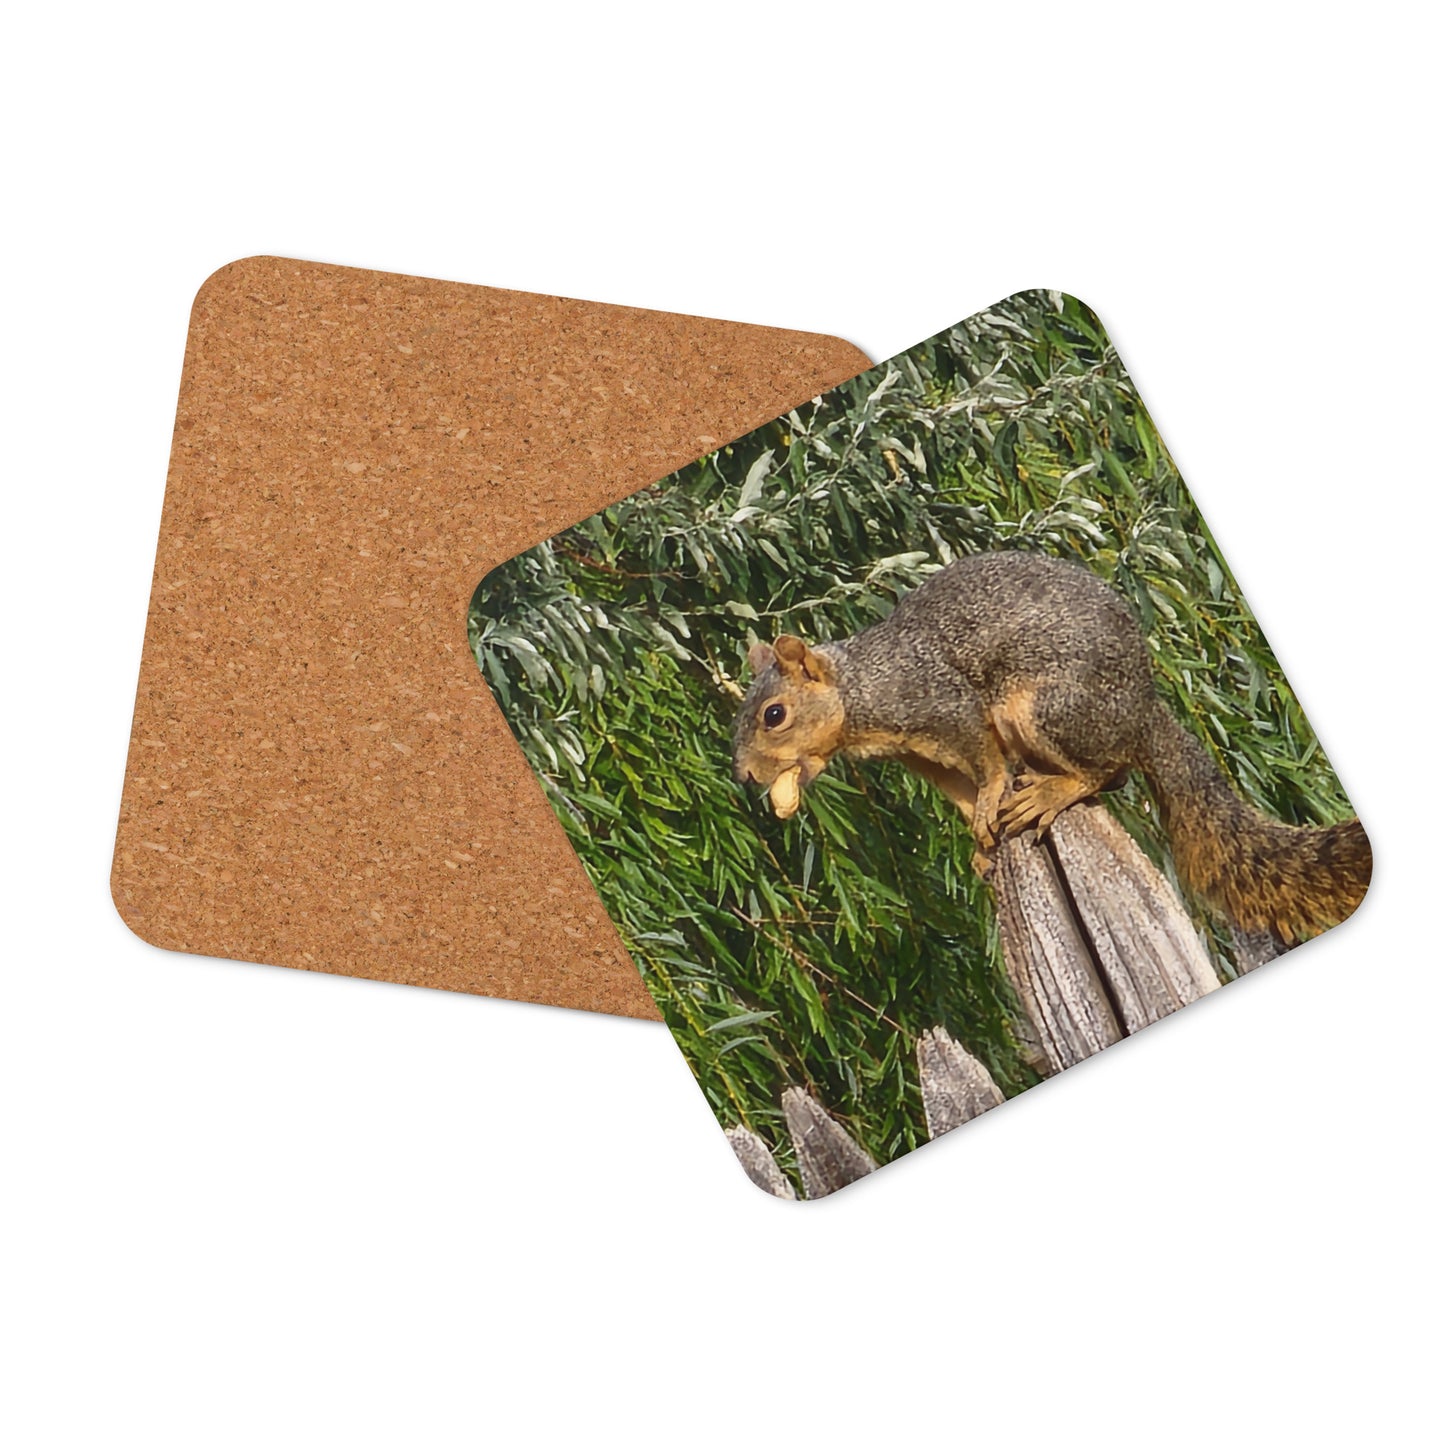 Hungry Squirrel Cork-back coaster